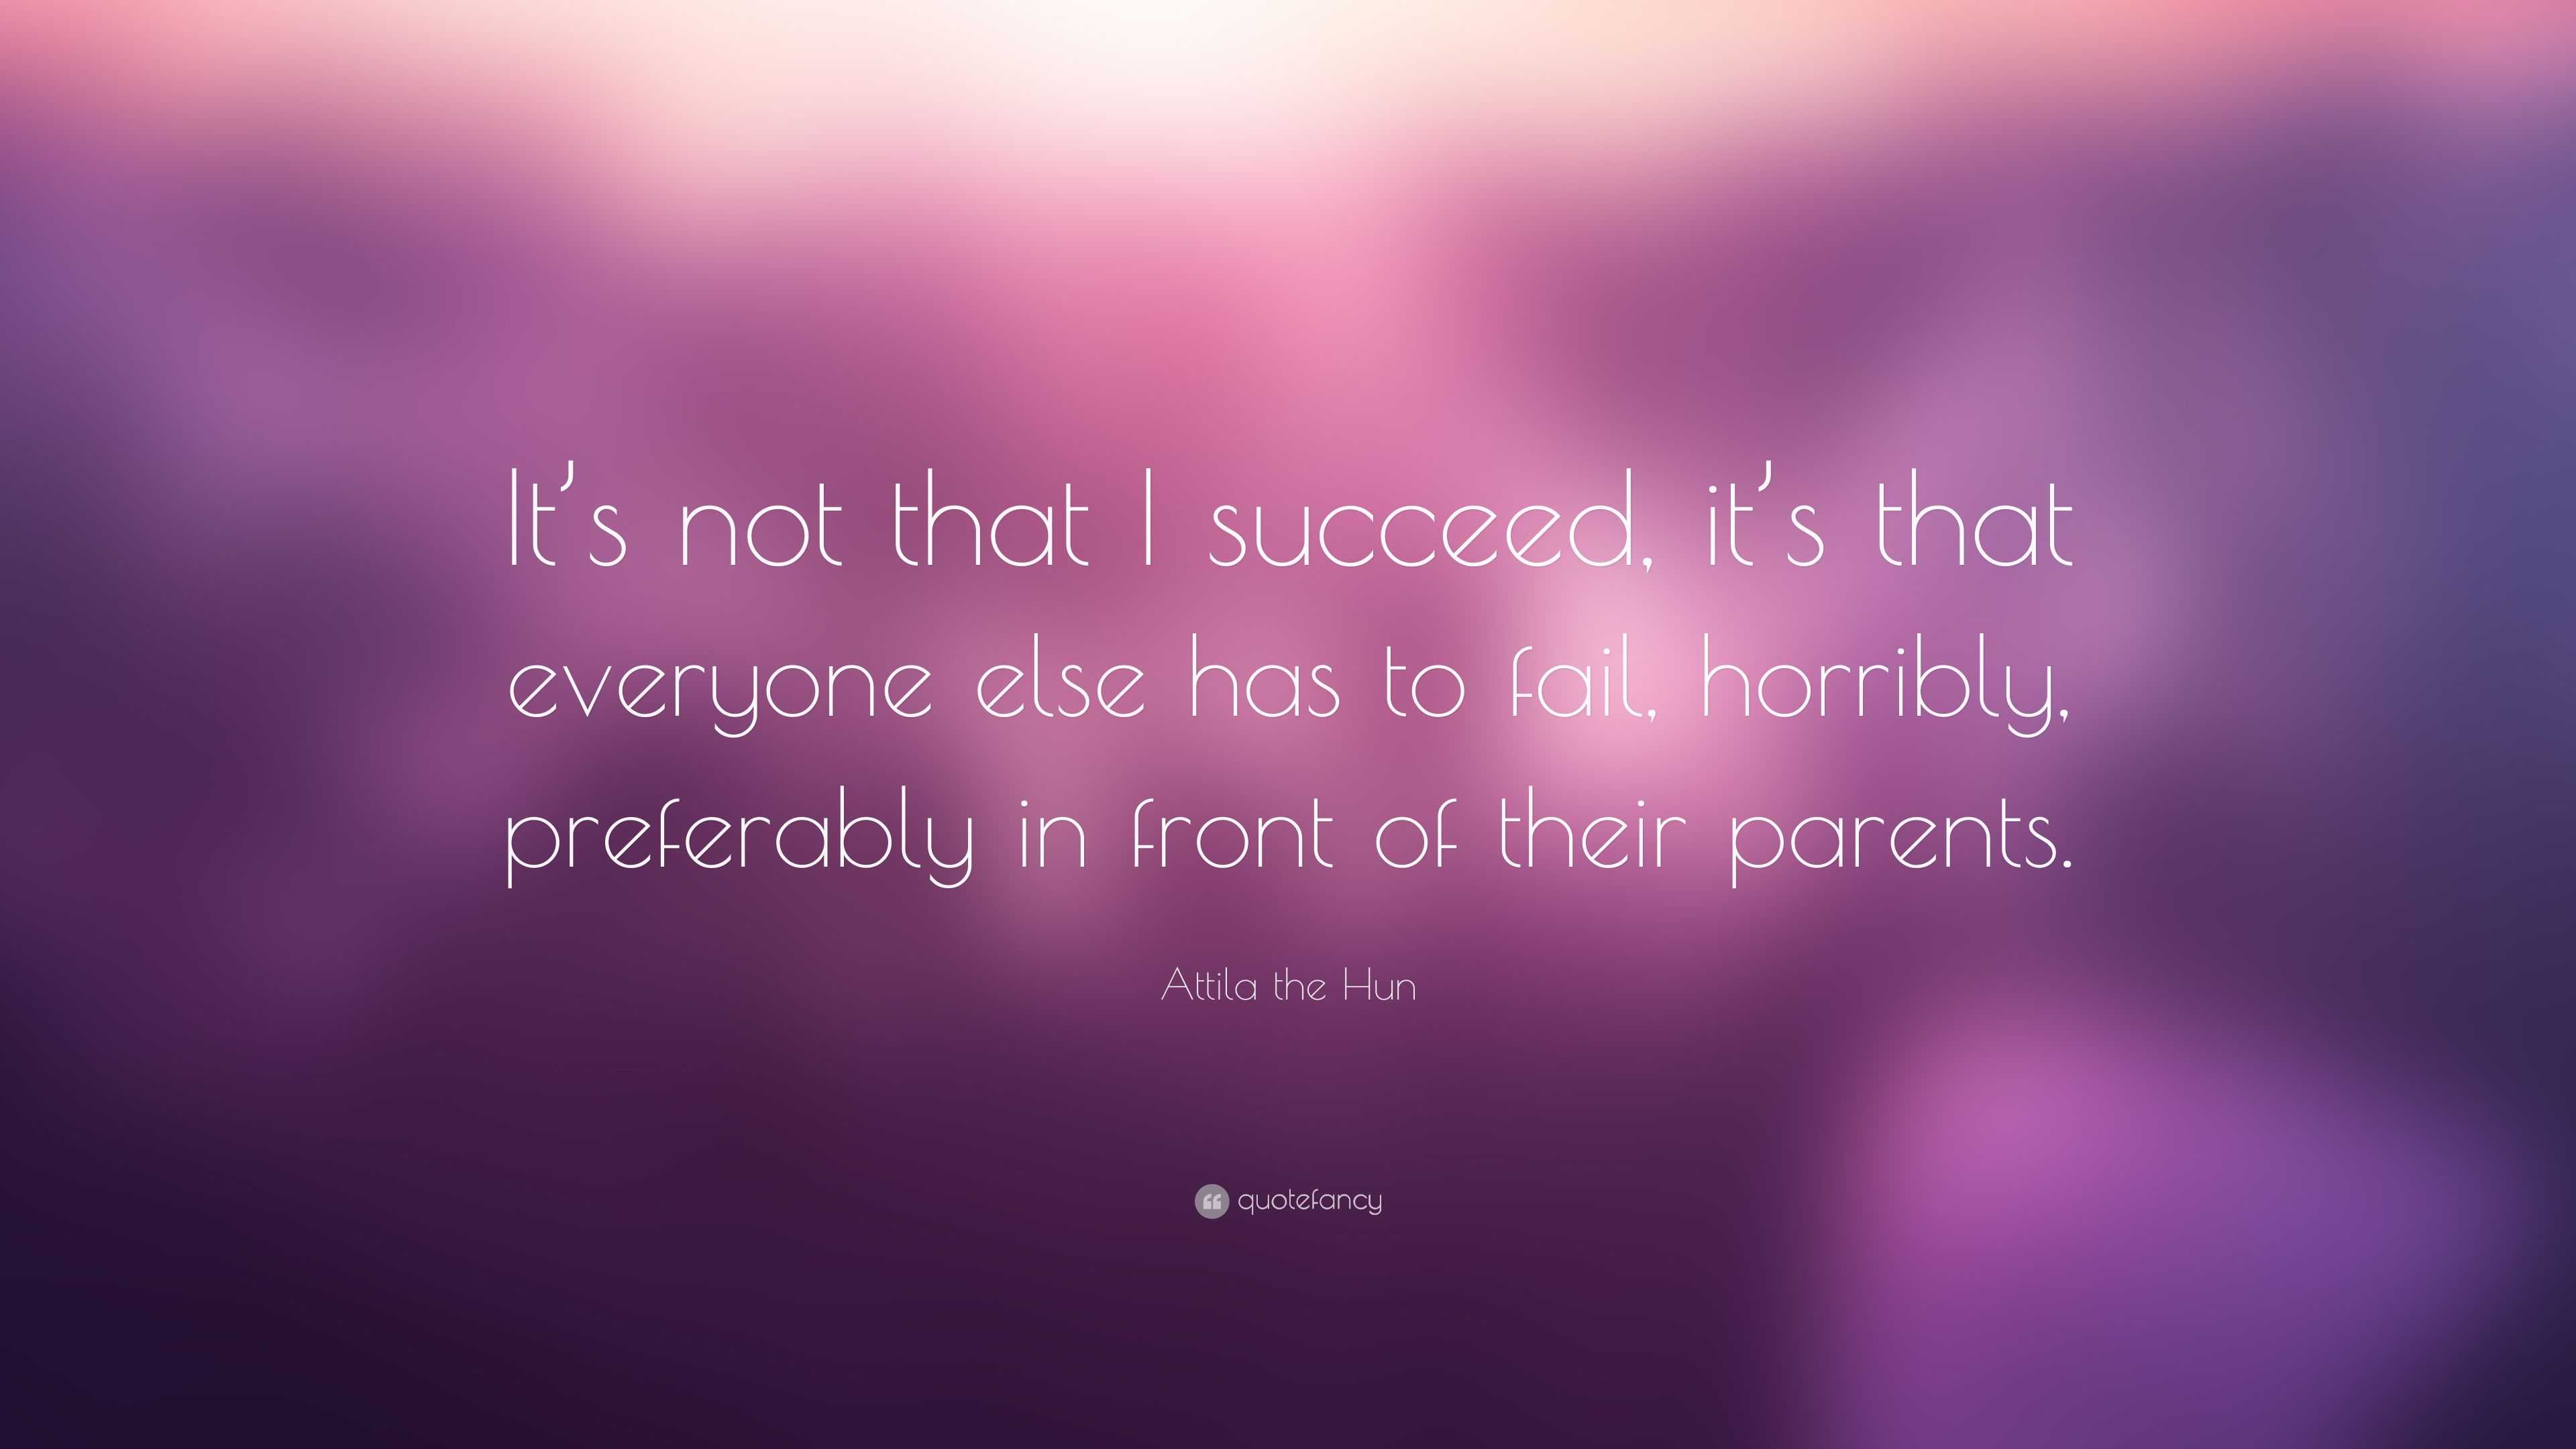 Attila the Hun Quote: "It's not that I succeed, it's that ...